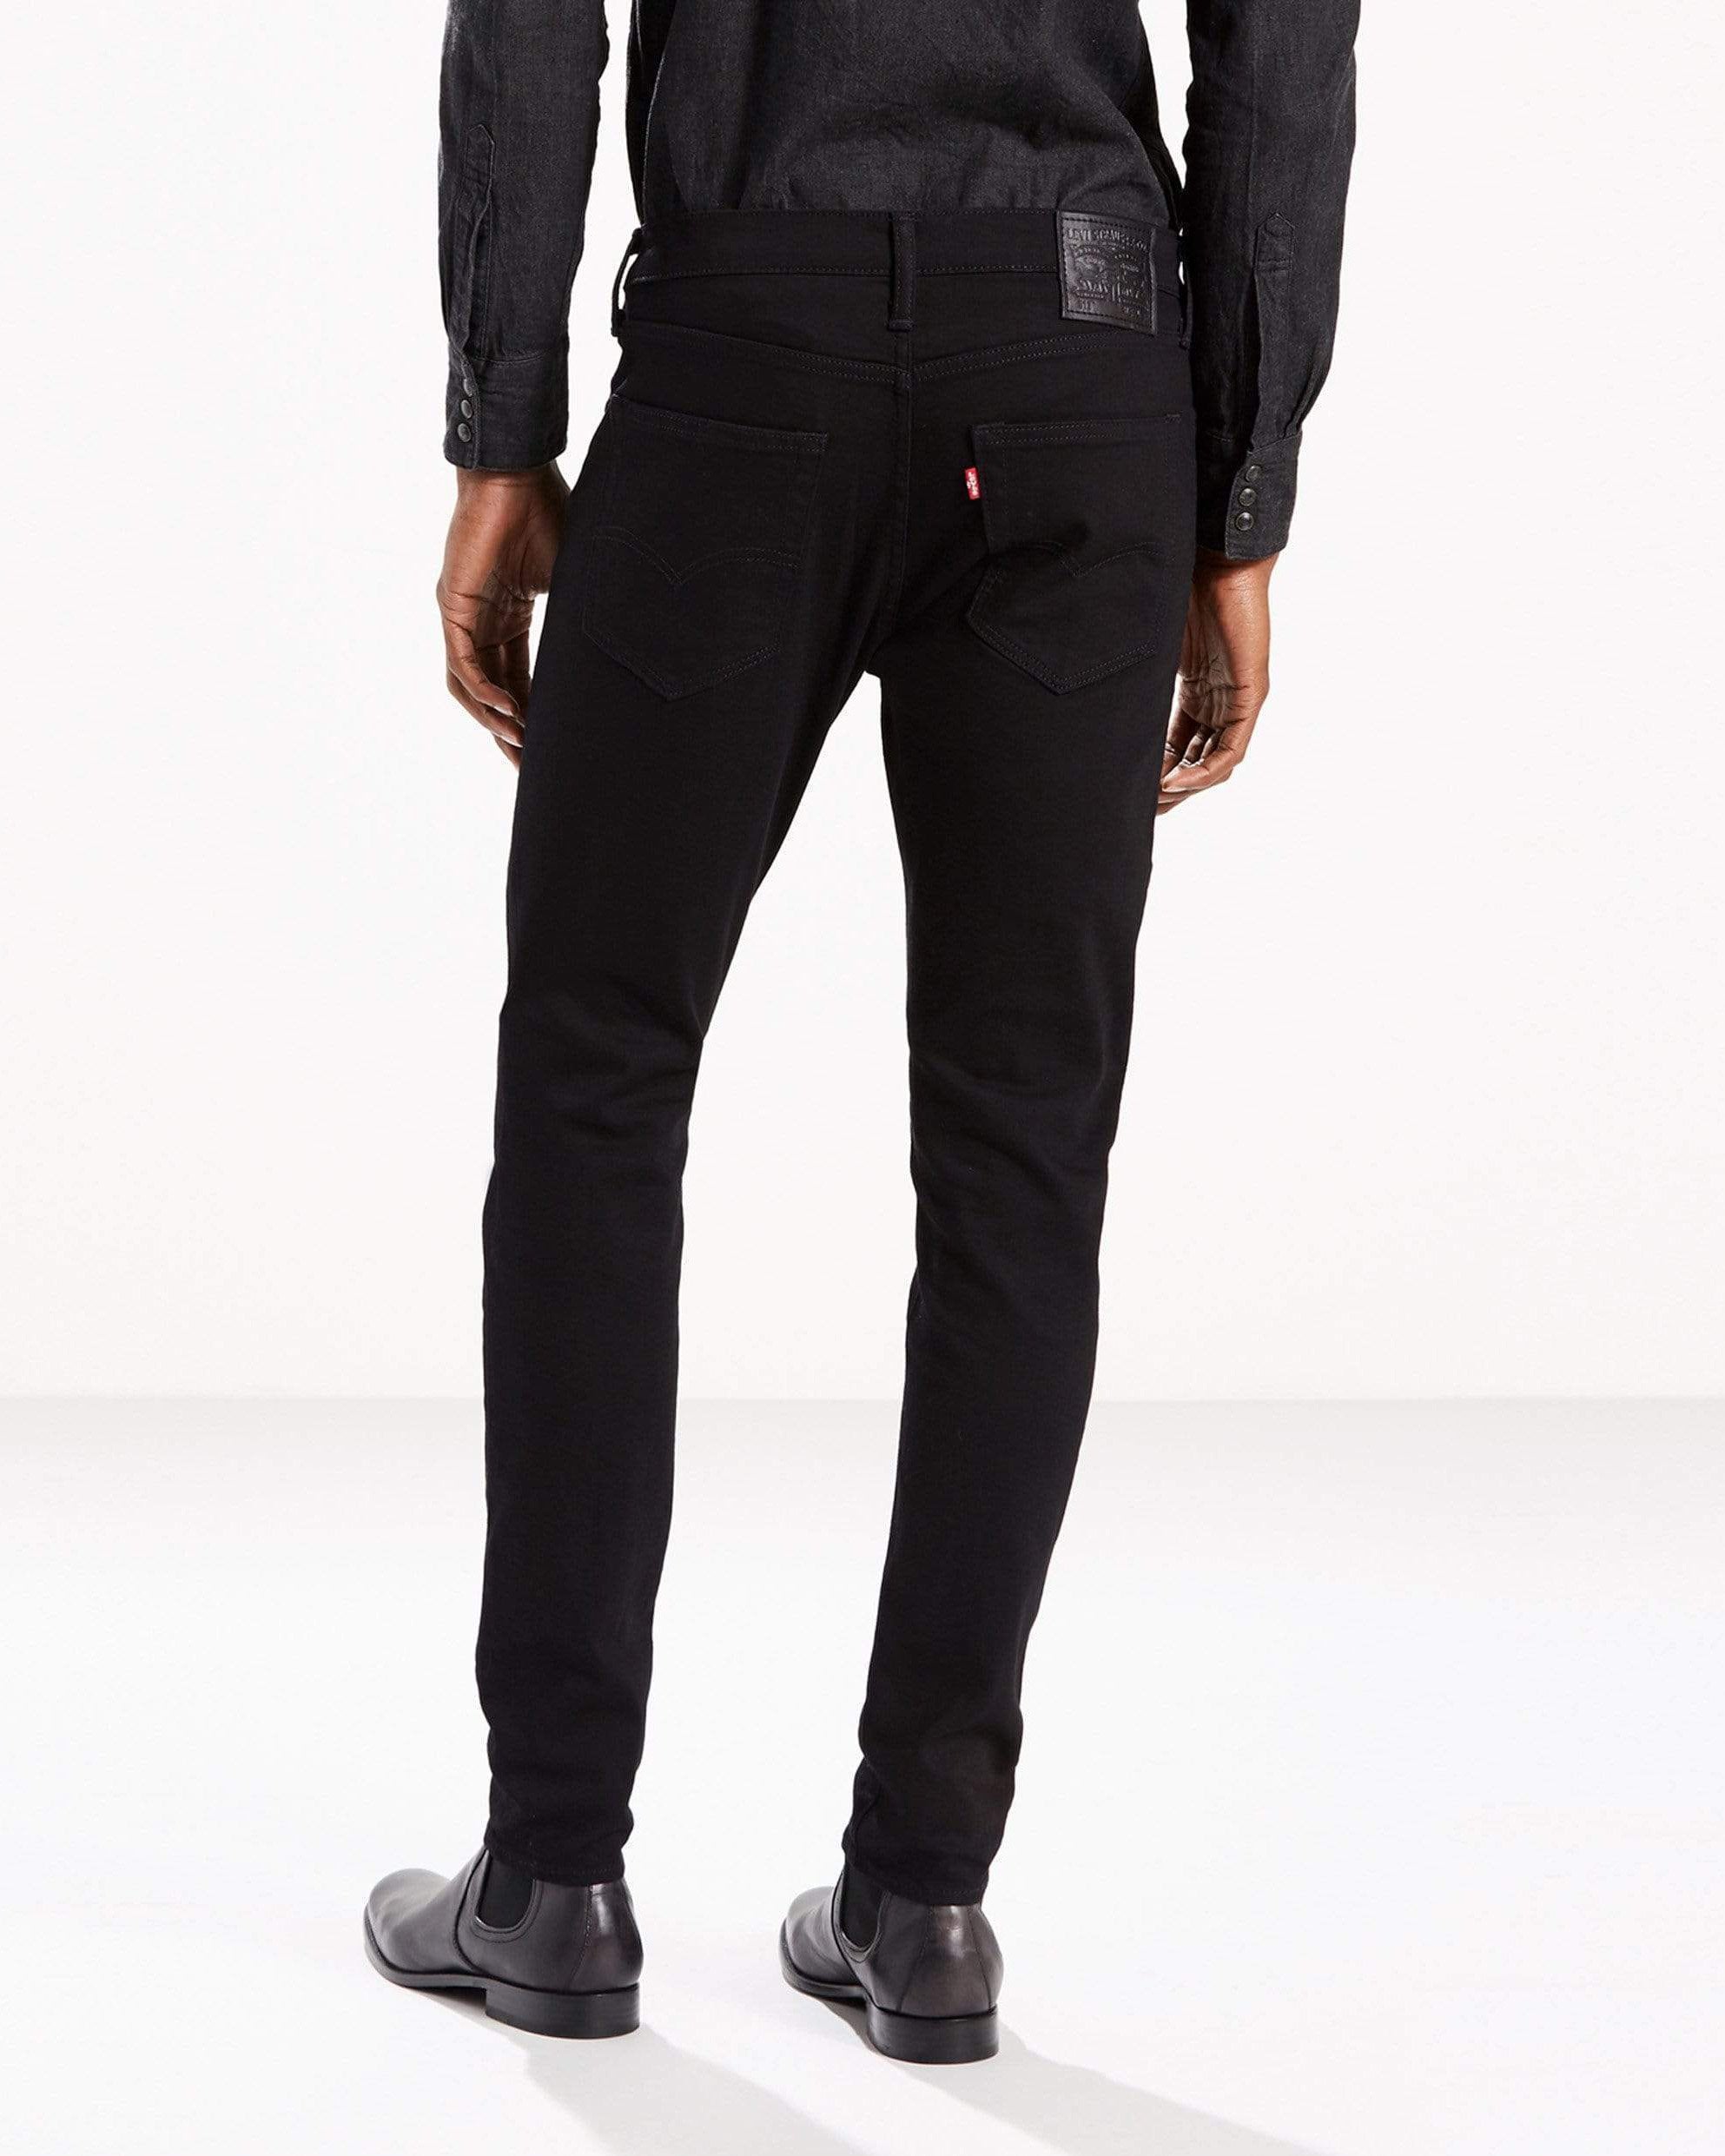 Levis 512 Slim Tapered Mens - Nightshine - Jeans and Street Fashion from Jeanstore